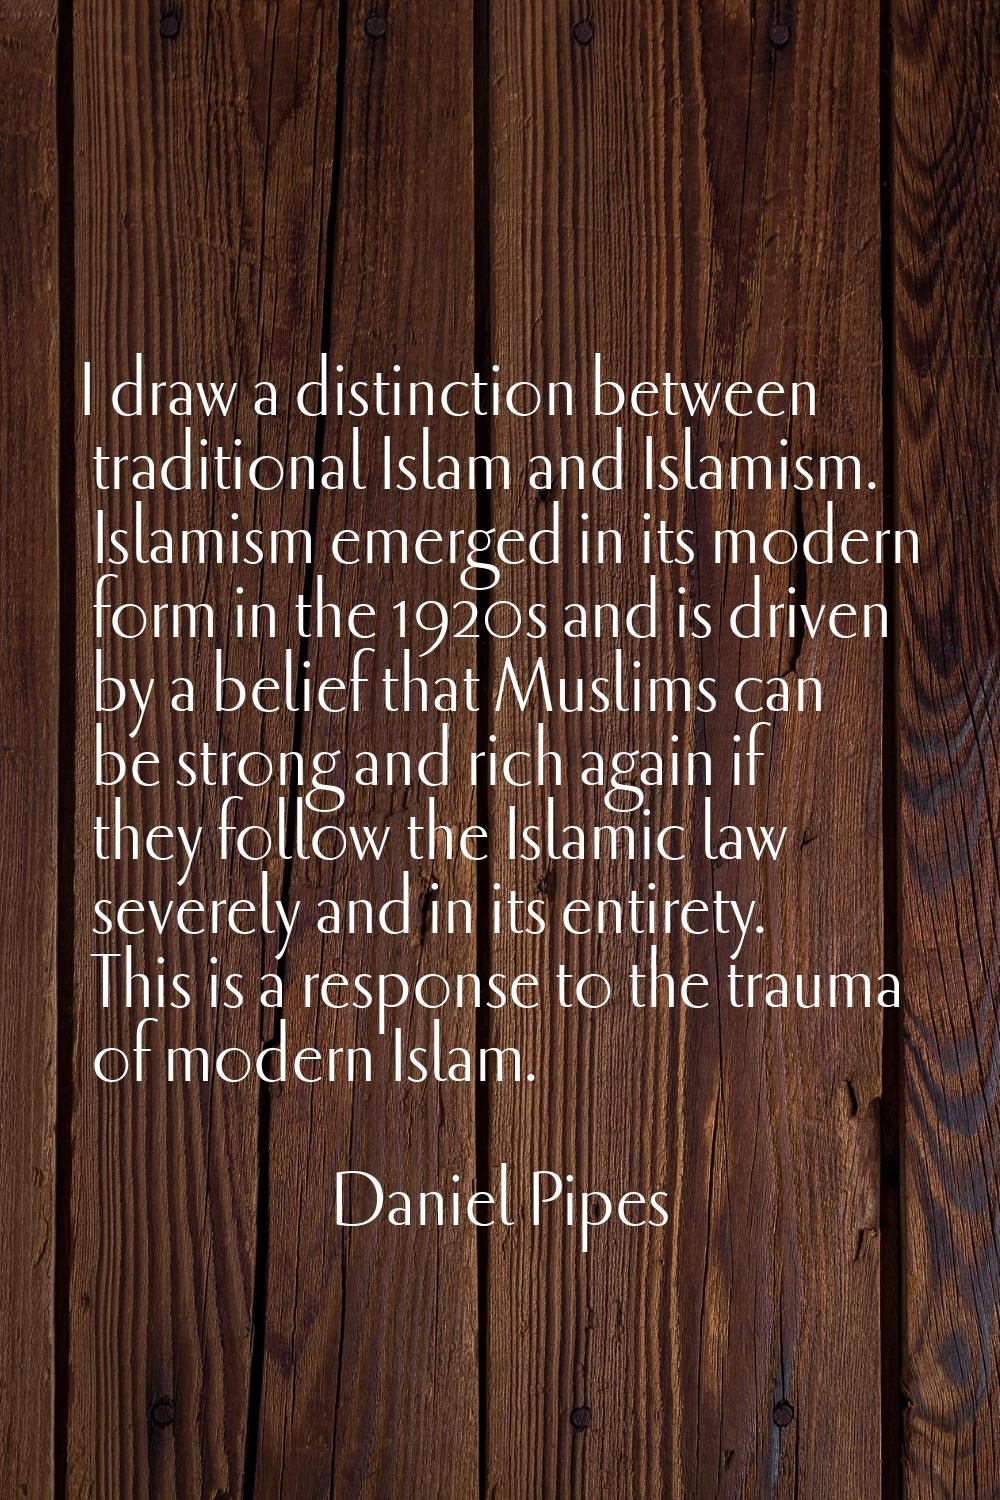 I draw a distinction between traditional Islam and Islamism. Islamism emerged in its modern form in